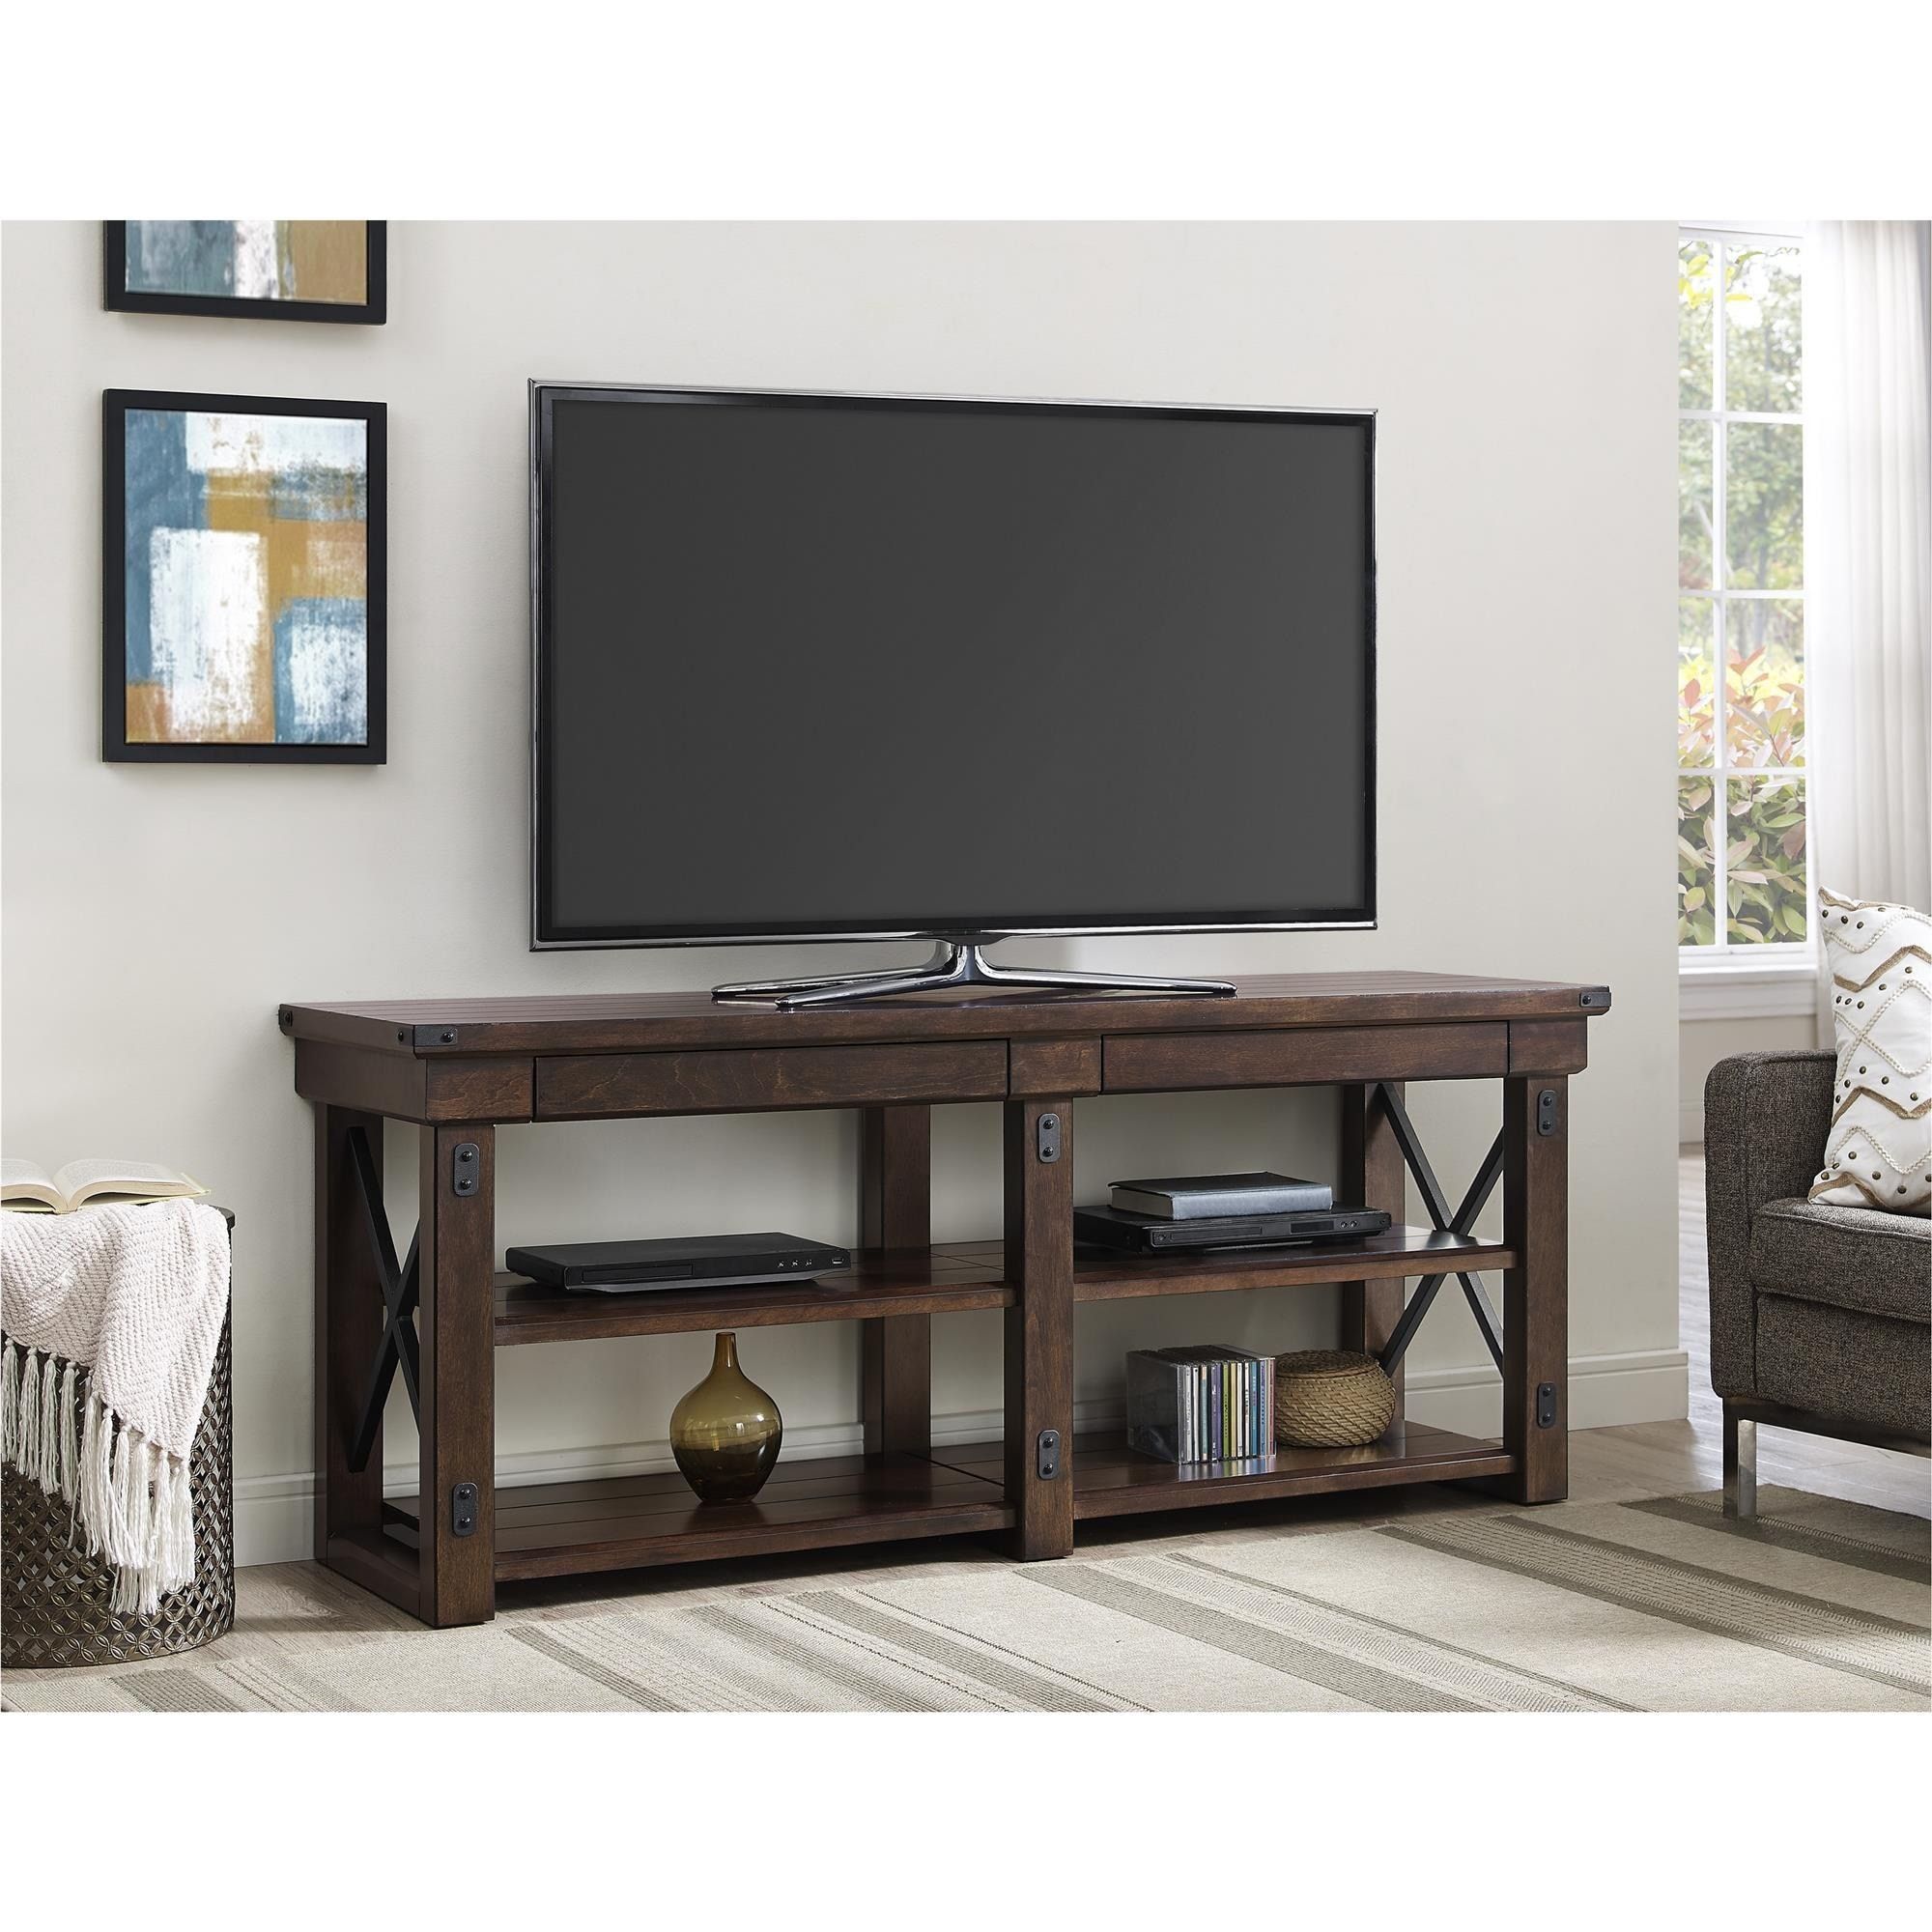 Online Shopping – Bedding, Furniture, Electronics, Jewelry Within Narrow Tv Stands For Flat Screens (View 7 of 15)